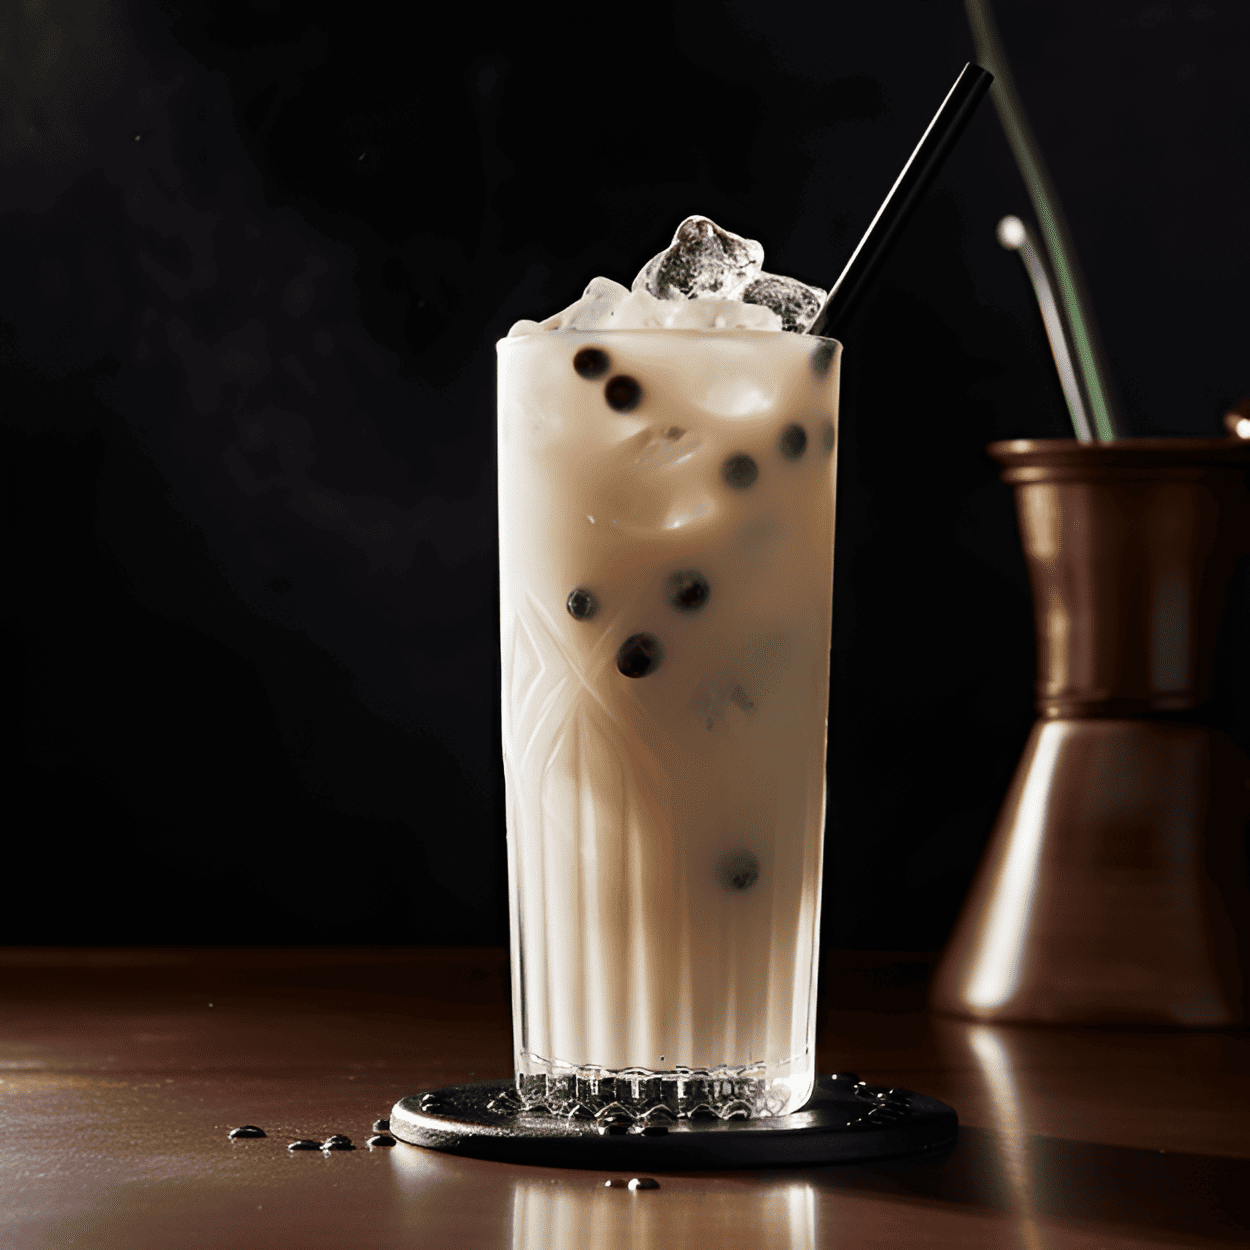 Boba Cocktail Recipe - The Boba Cocktail offers a sweet and creamy taste with a hint of fruitiness from the liqueur. The chewy tapioca pearls add an interesting texture that makes this cocktail a unique drinking experience.